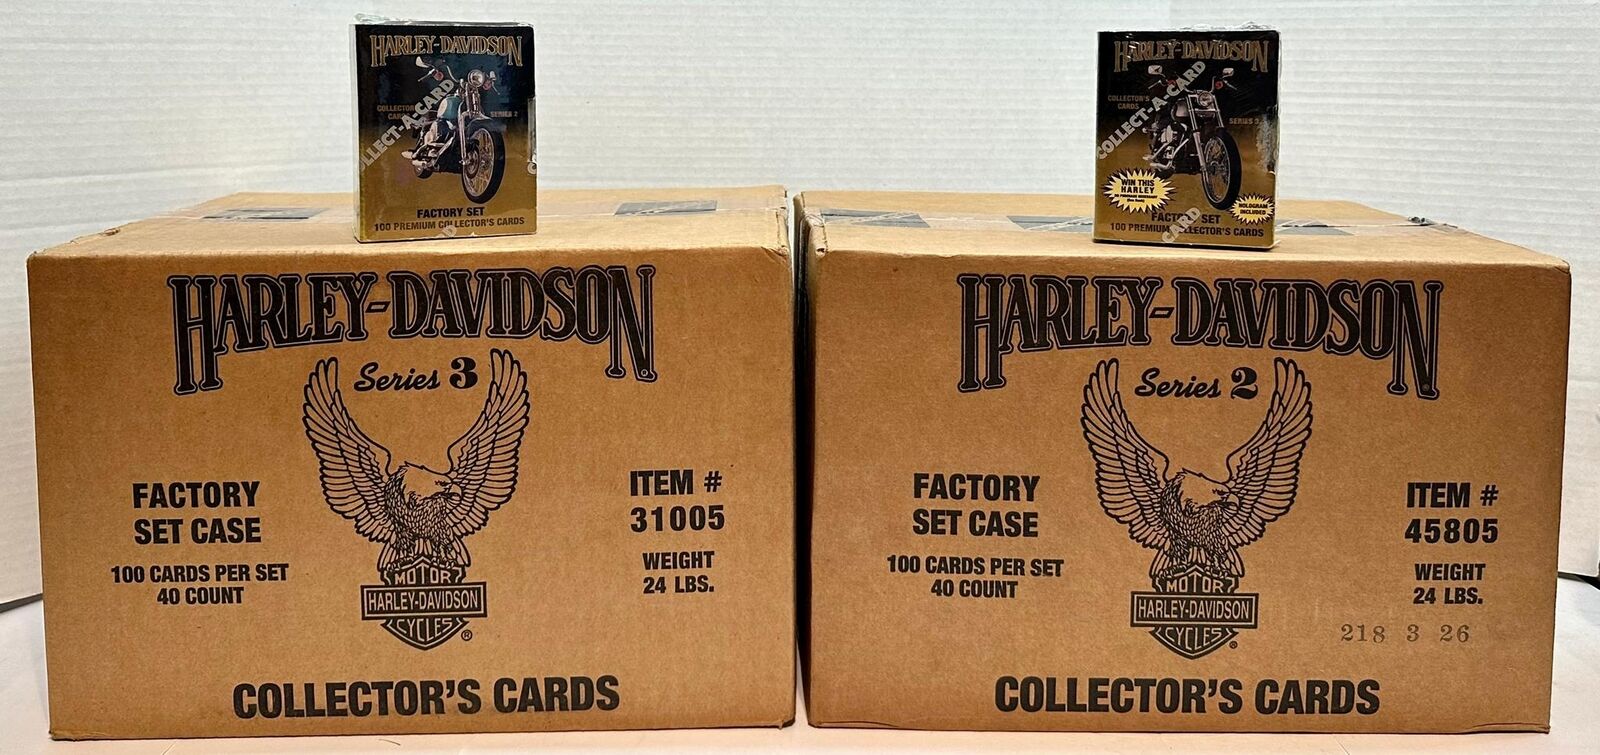 1992 Harley Davidson Collector Cards Series 2 & 3 Factory Card Case of 80 Sets